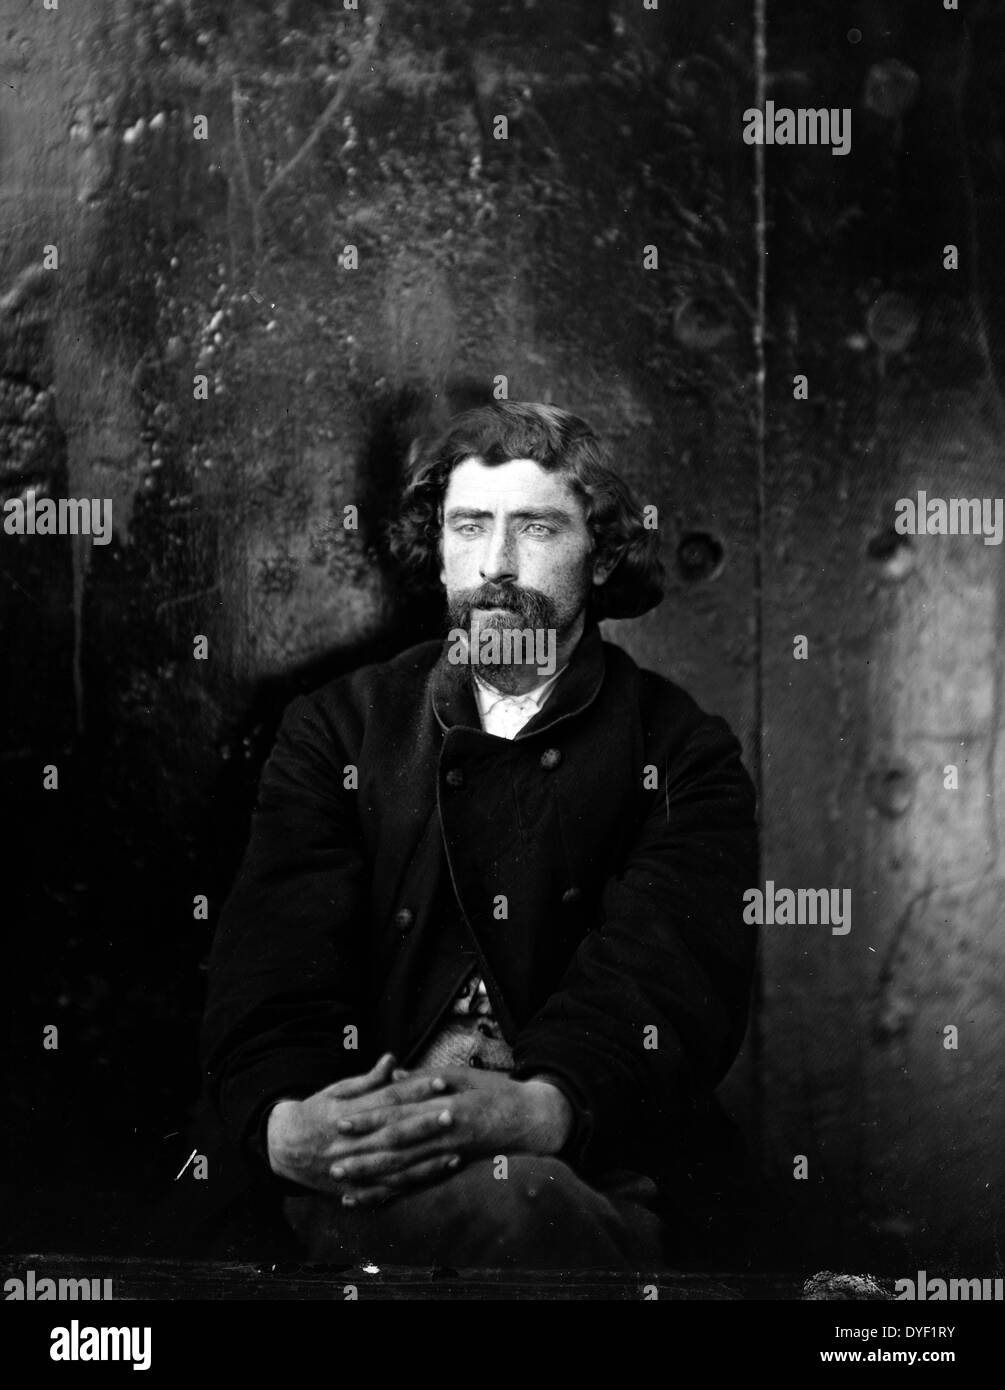 Washington Navy Yard, D.C. Unidentified man, arrested on suspicion of being a conspirator (has been erroneously taken for Dr. Samuel A. Mudd, who had a bald forehead; but is probably Hartman Richter, Atzerodt's cousin, arrested with him but later released 1865. Photograph of Washington, 1862-1865, the assassination of President Lincoln, April-July 1865. This photograph has background of dark metal, and was presumably taken on the monitors, U.S.S. Montauk and Saugus, where the conspirators were for a time confined. Stock Photo